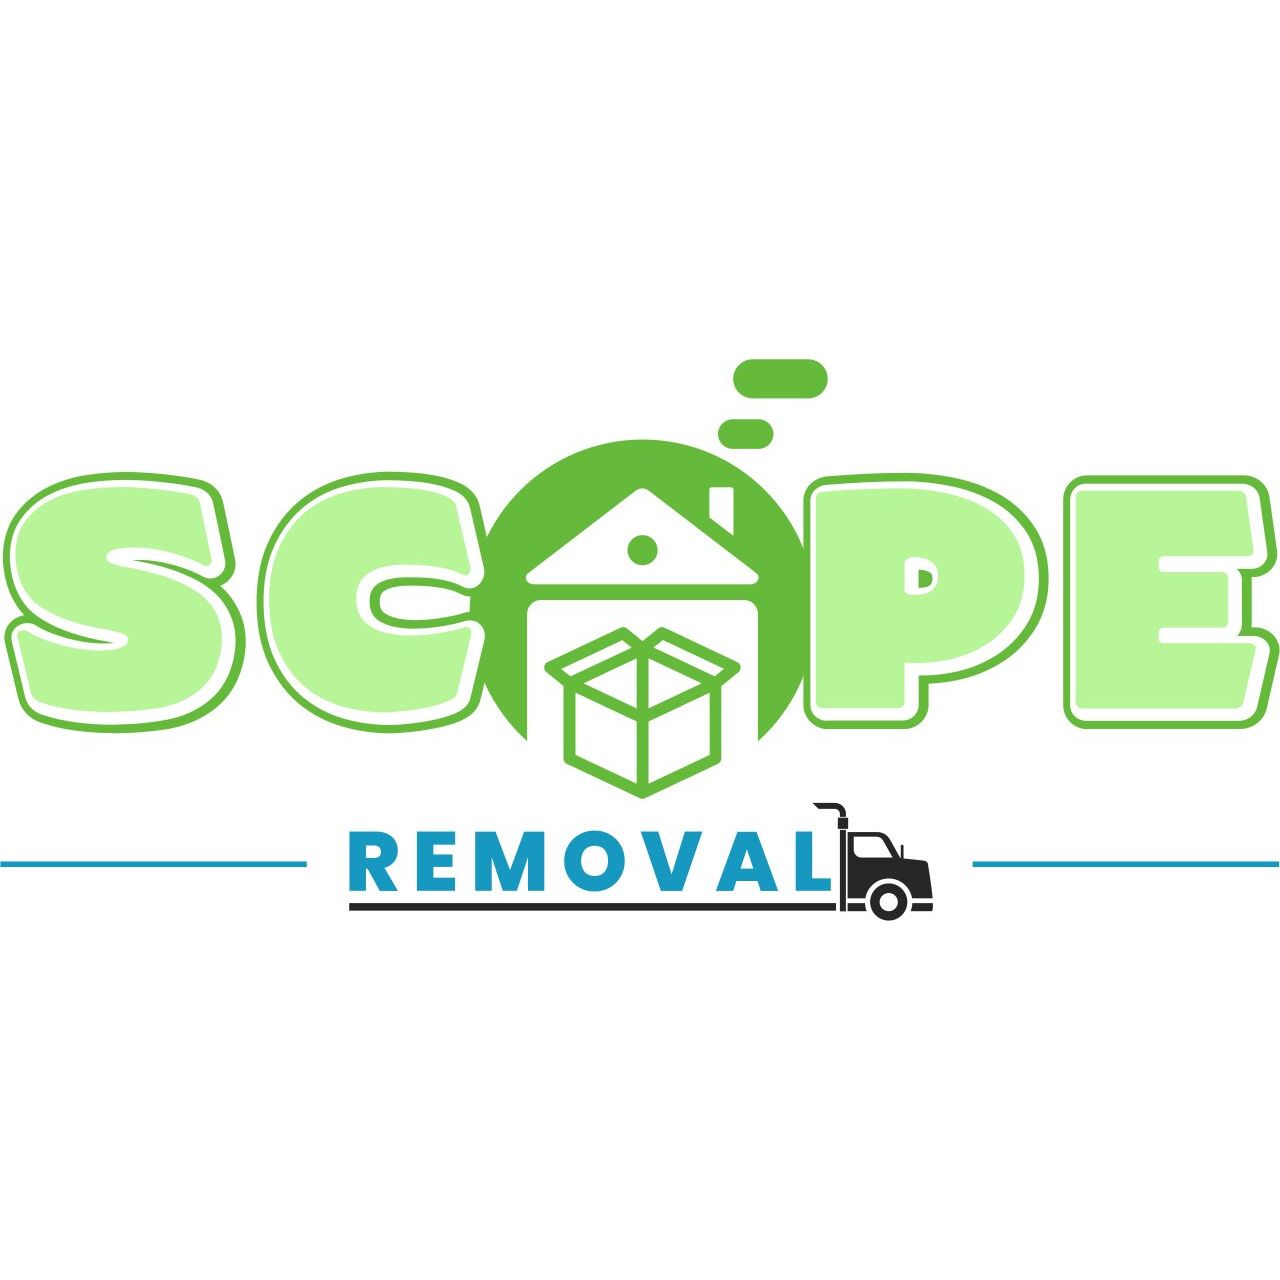 Logo of Scope Removal